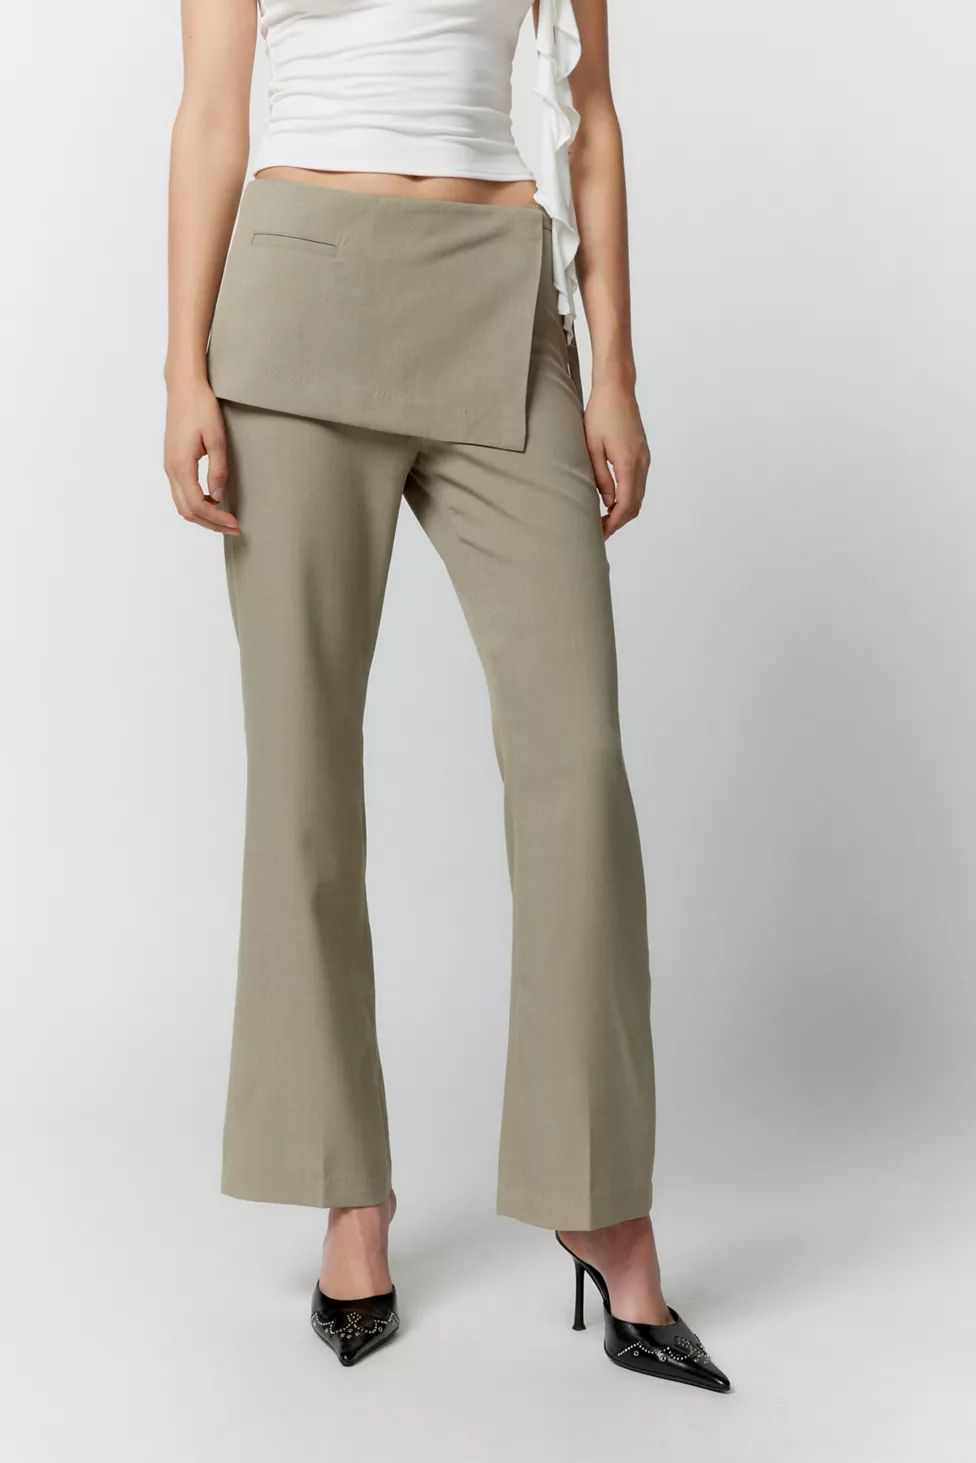 Silence + Noise Staci Trouser Pant | Urban Outfitters (US and RoW)